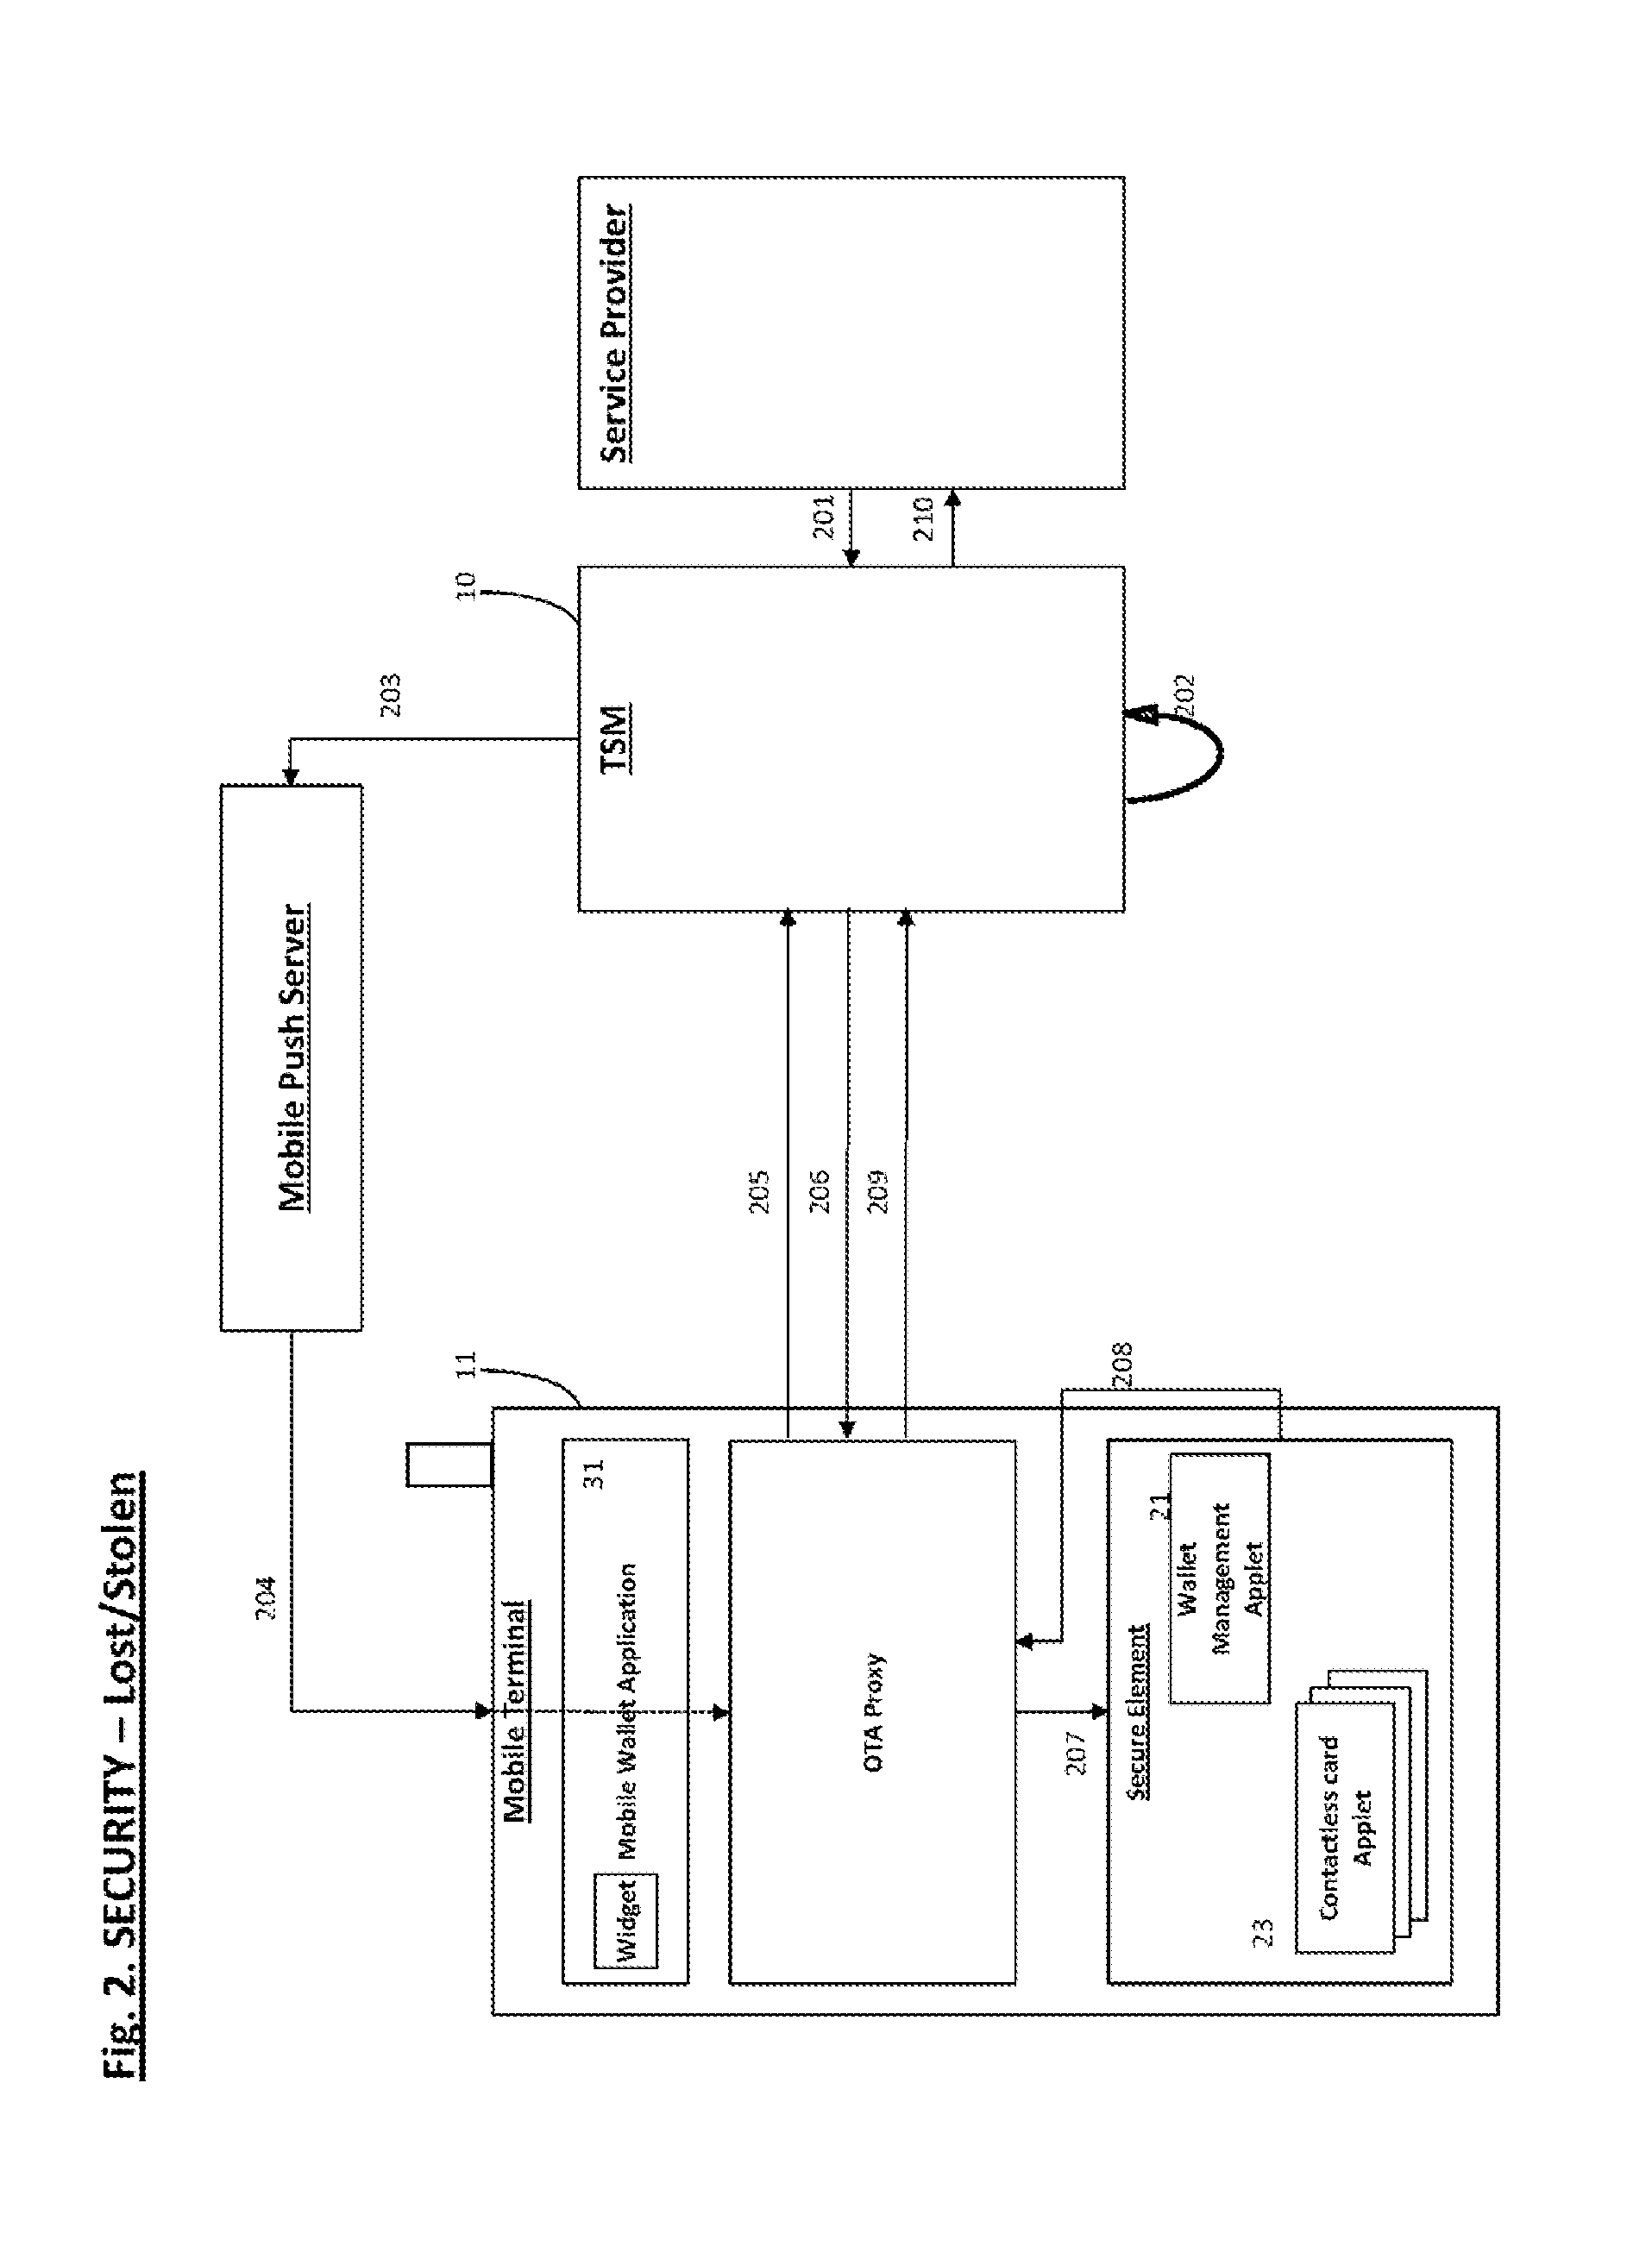 System and method for secure containment of sensitive financial information stored in a mobile communication terminal